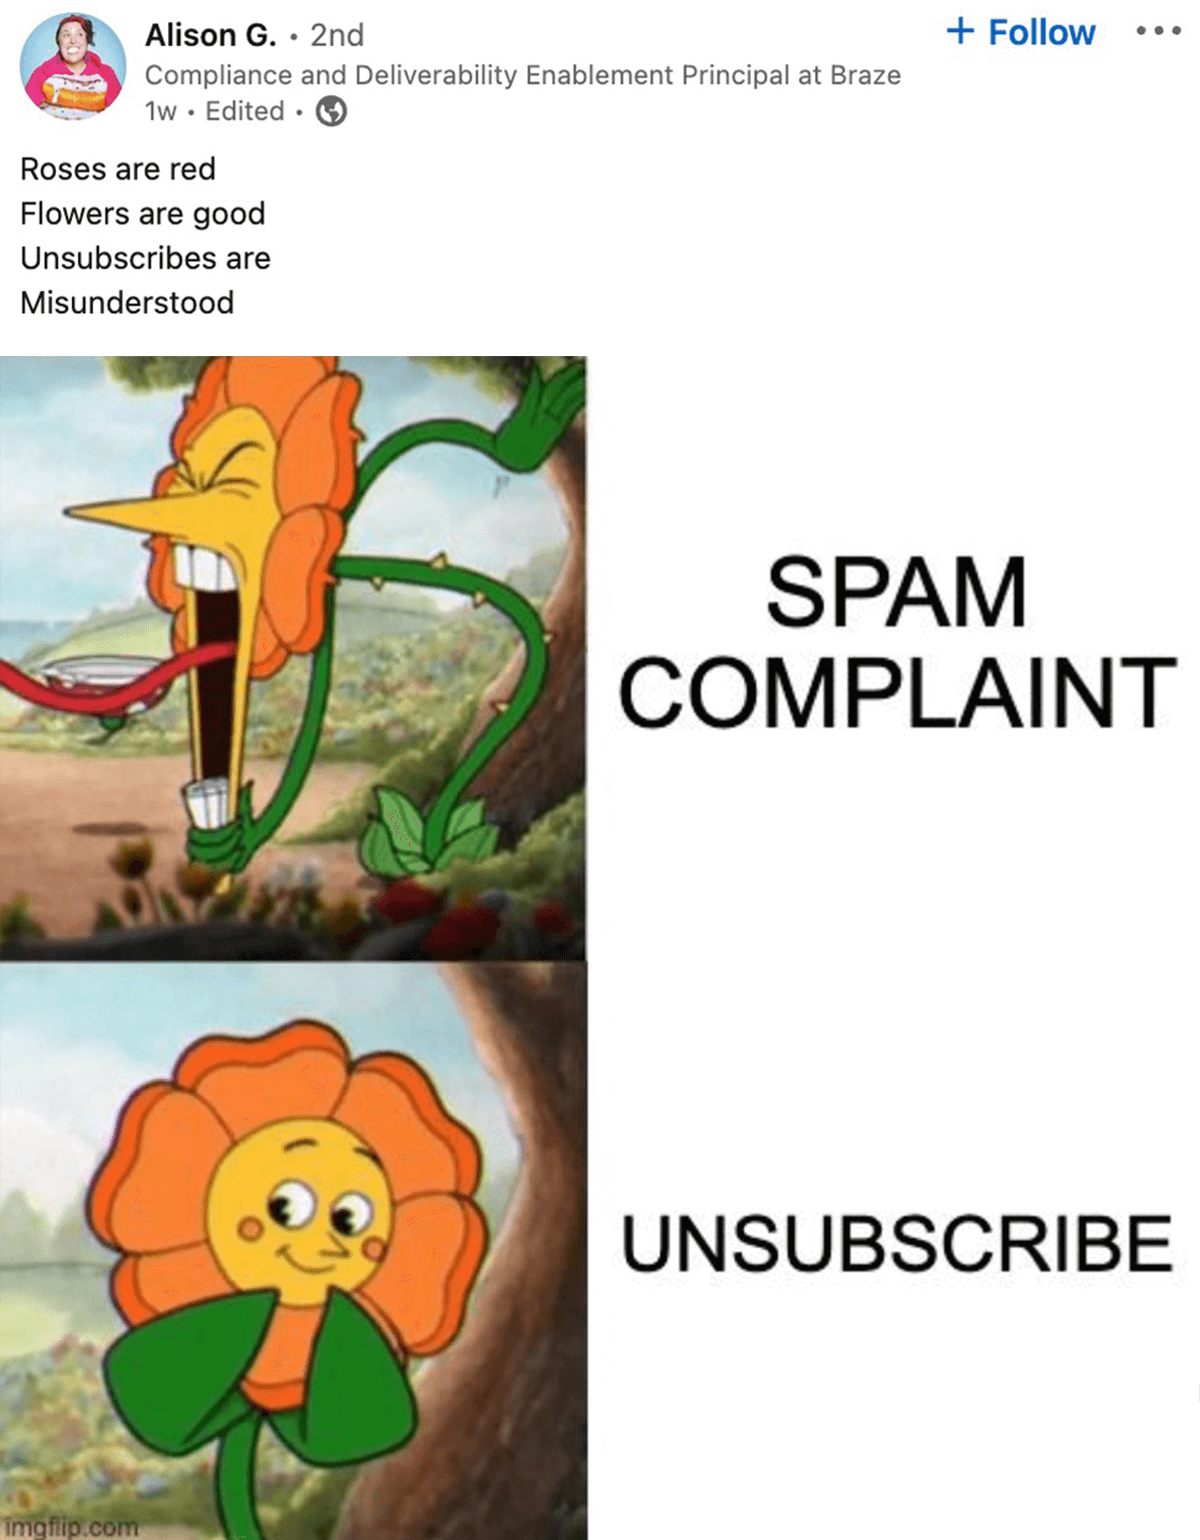 Alison G. on LinkedIn: Roses are red, flowers are good, unsubscribes are misunderstood. A meme with a flower yelling about a spam complaint and smiling about unsubscribes.